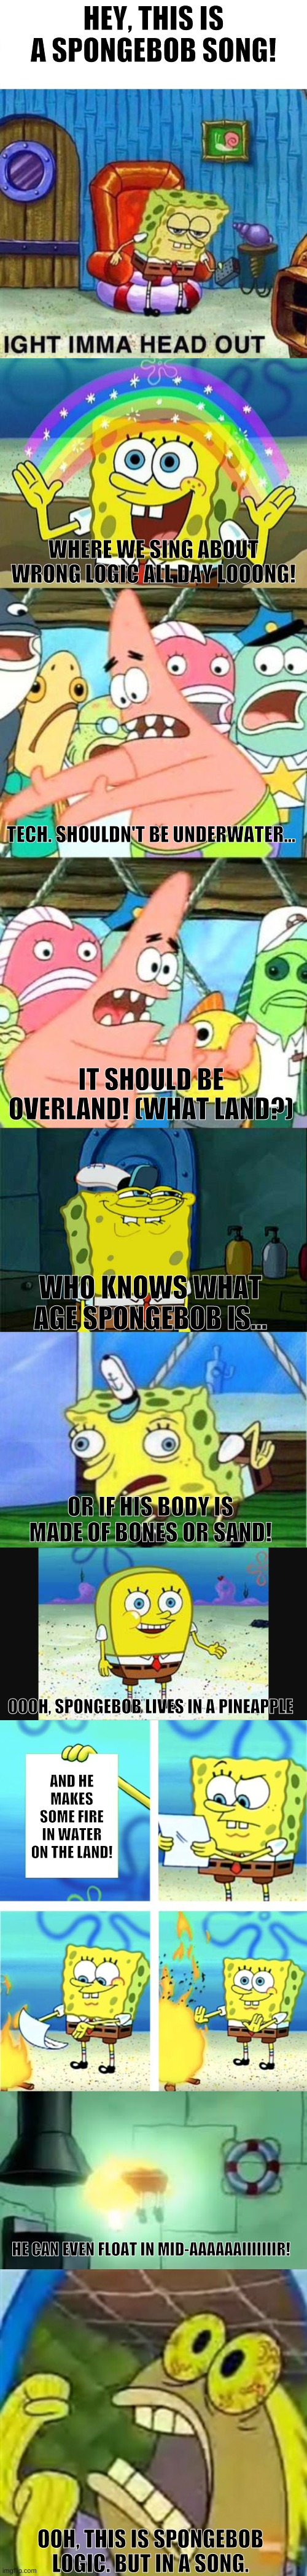 Spongebob Logic Text Song That Showcases Many Spongebob Memes!!! | HEY, THIS IS A SPONGEBOB SONG! WHERE WE SING ABOUT WRONG LOGIC ALL DAY LOOONG! TECH. SHOULDN'T BE UNDERWATER... IT SHOULD BE OVERLAND! (WHAT LAND?); WHO KNOWS WHAT AGE SPONGEBOB IS... OR IF HIS BODY IS MADE OF BONES OR SAND! OOOH, SPONGEBOB LIVES IN A PINEAPPLE; AND HE MAKES SOME FIRE IN WATER ON THE LAND! HE CAN EVEN FLOAT IN MID-AAAAAAIIIIIIIR! OOH, THIS IS SPONGEBOB LOGIC. BUT IN A SONG. | image tagged in memes,put it somewhere else patrick,don't you squidward,spongebob rainbow,chocolate spongebob meme,mocking spongebob | made w/ Imgflip meme maker